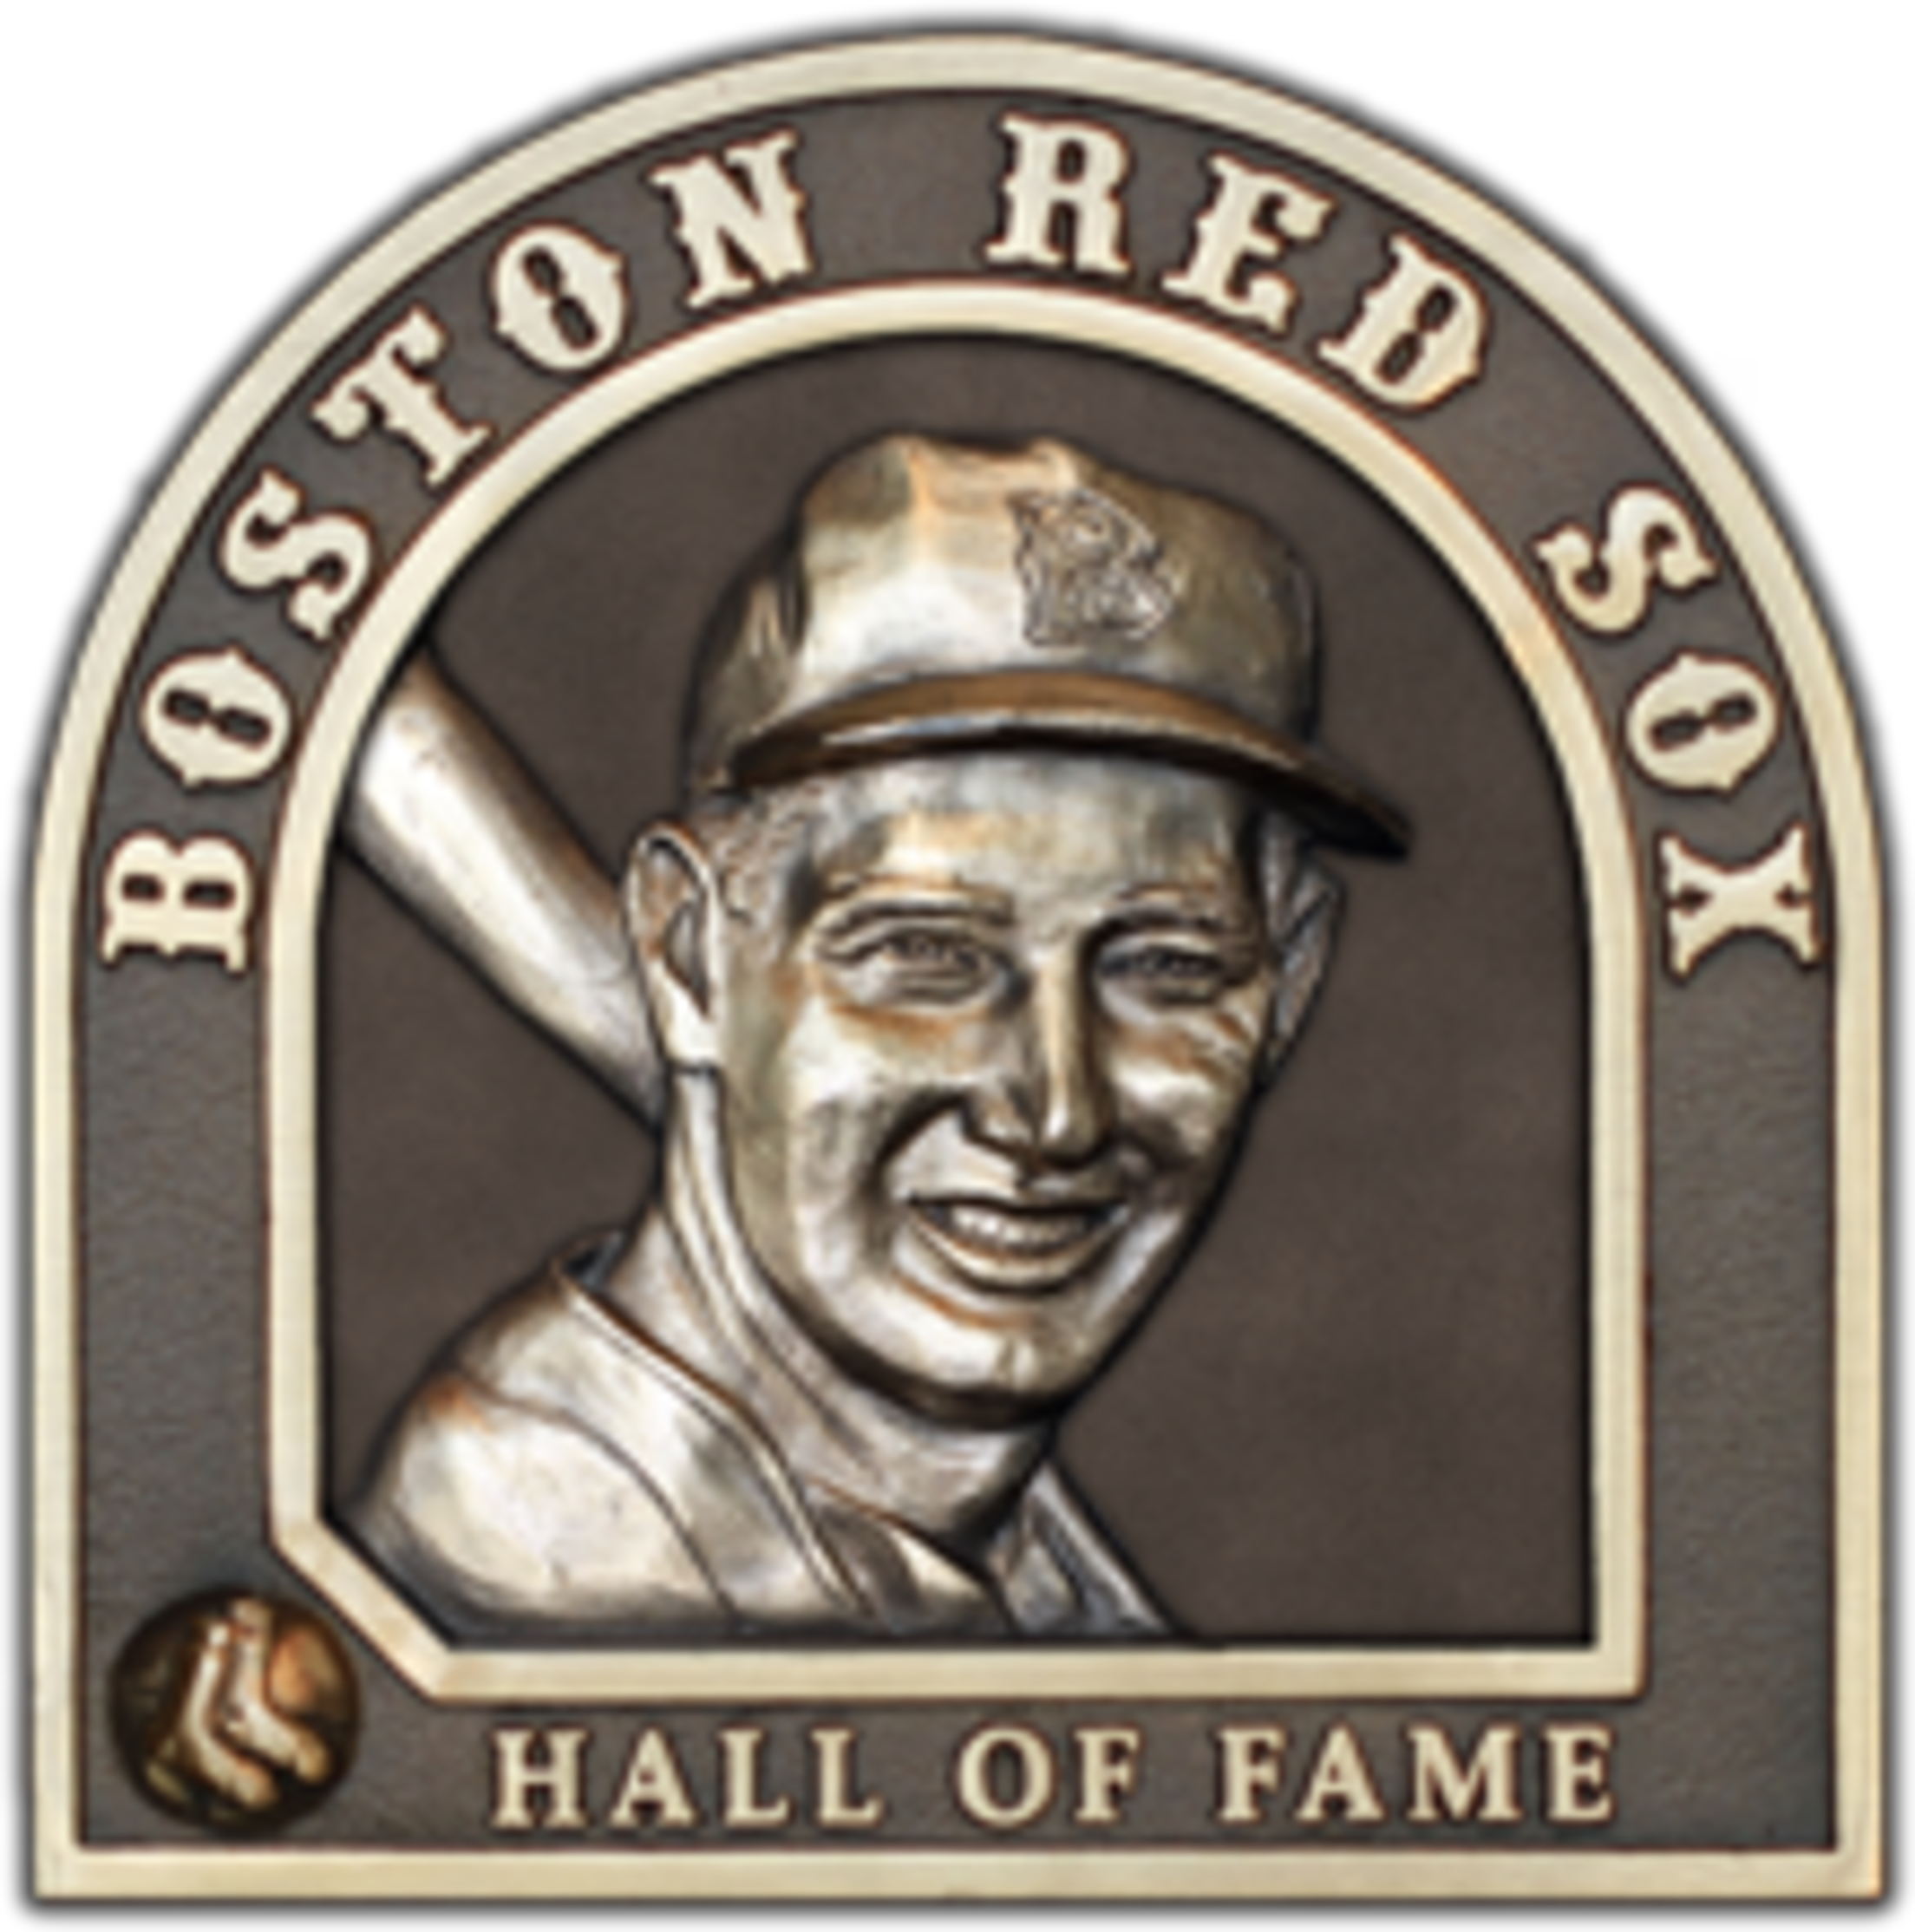 Hall of Fame, Fenway Park Living Museum